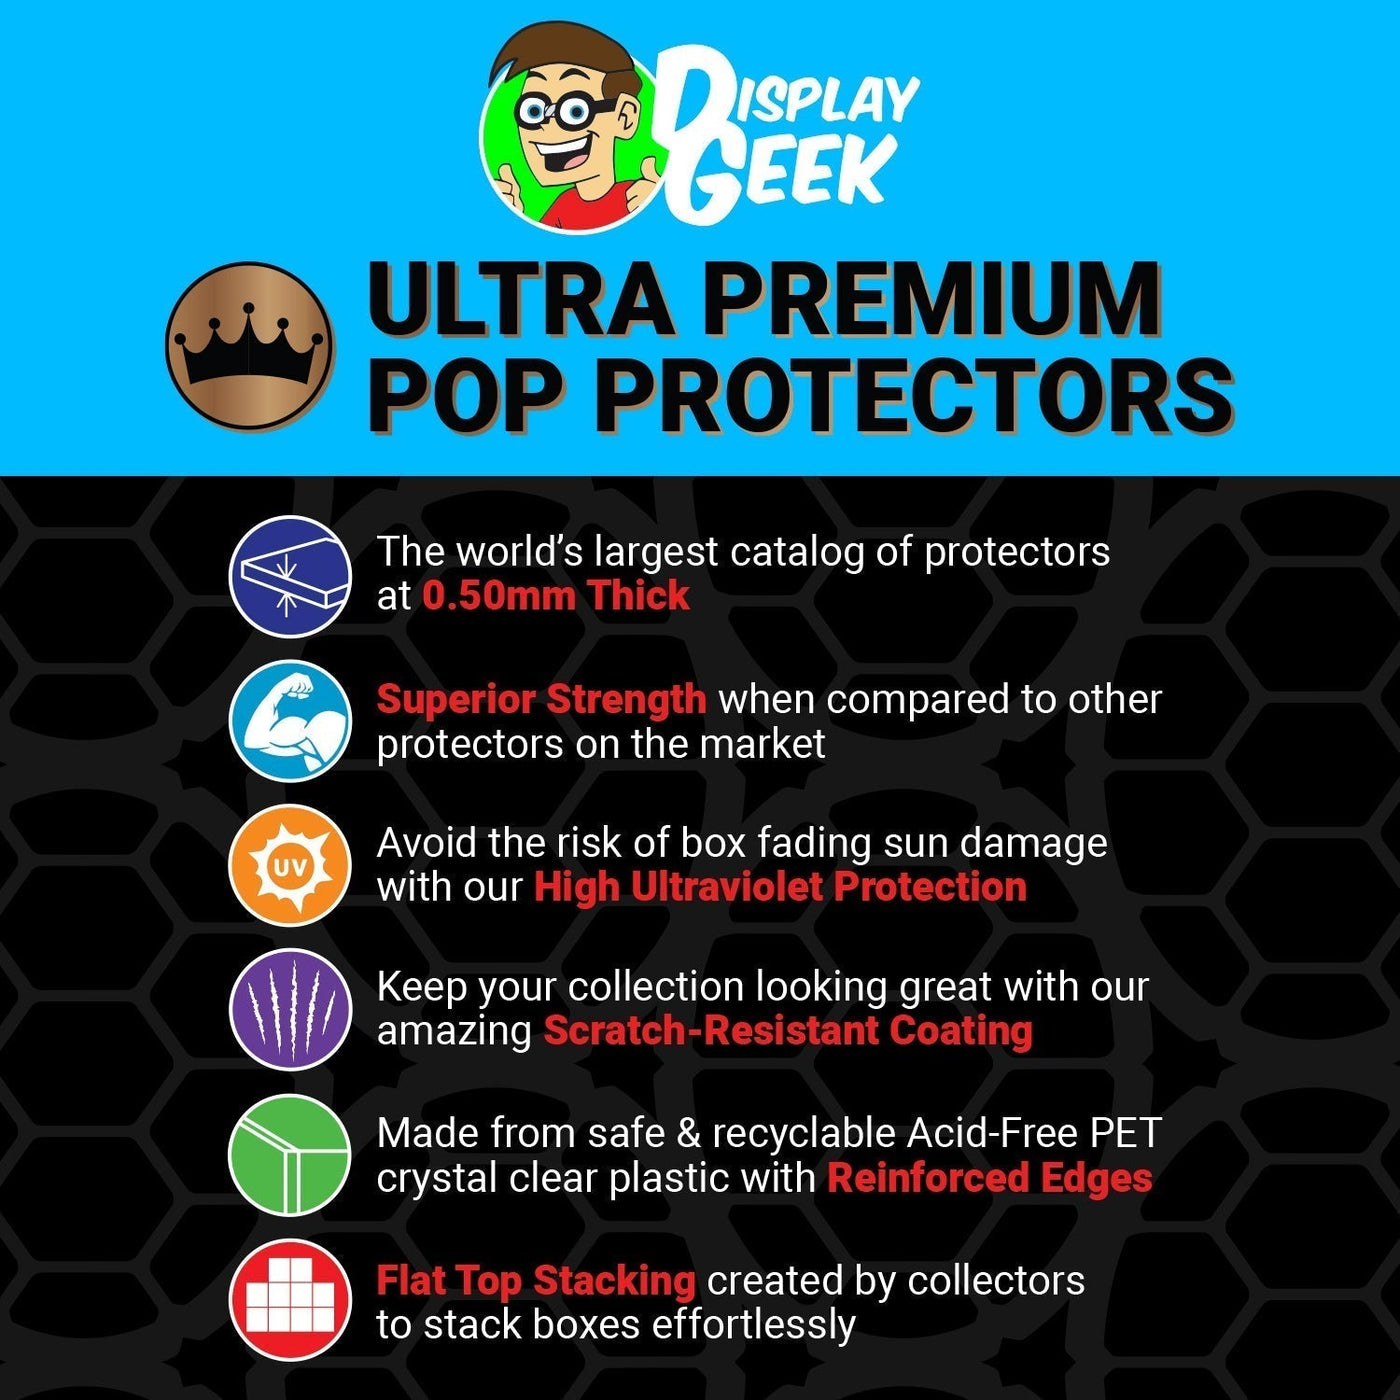 Pop Protector for 6 inch Hodor Holding the Door #88 Super Funko Pop on The Protector Guide App by Display Geek